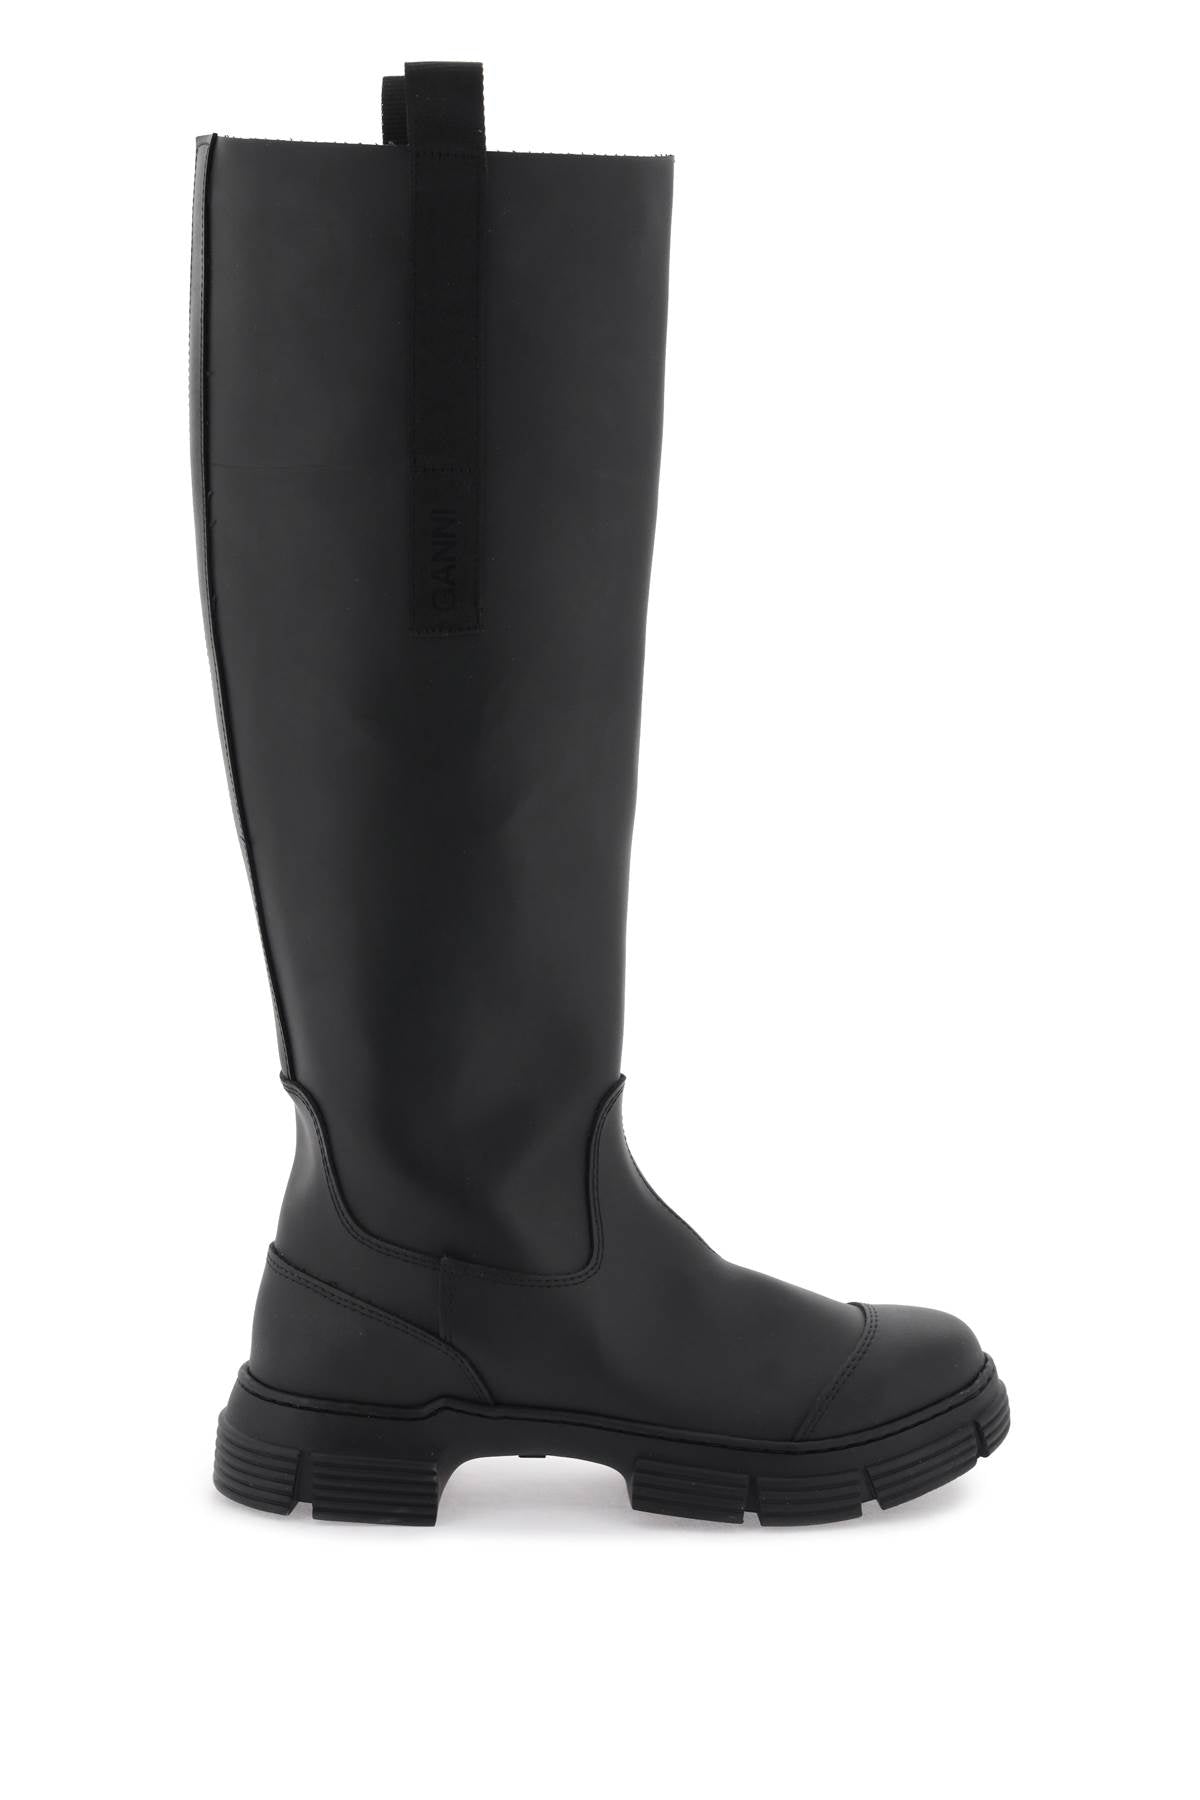 recycled rubber country boots S2172 BLACK